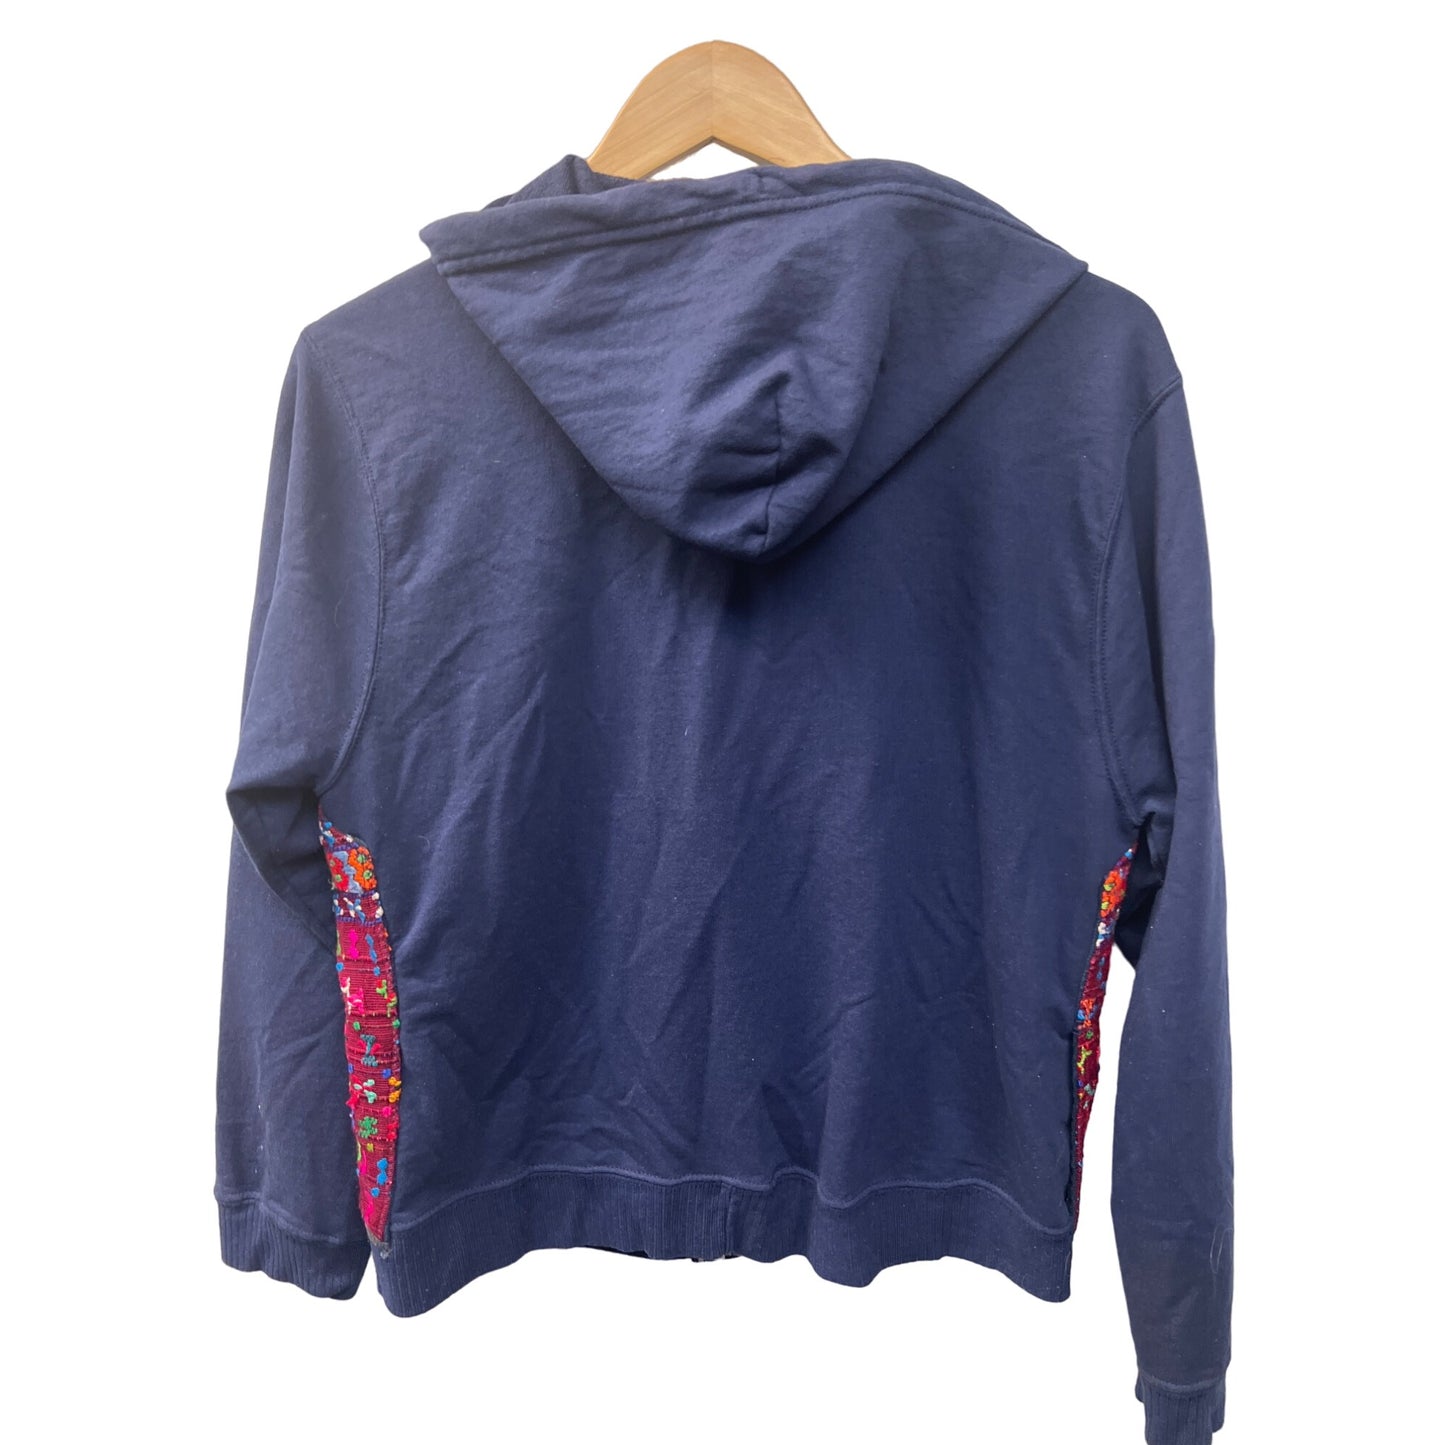 Guatemalan Red and Navy Embroidered Full Zip Hoodie